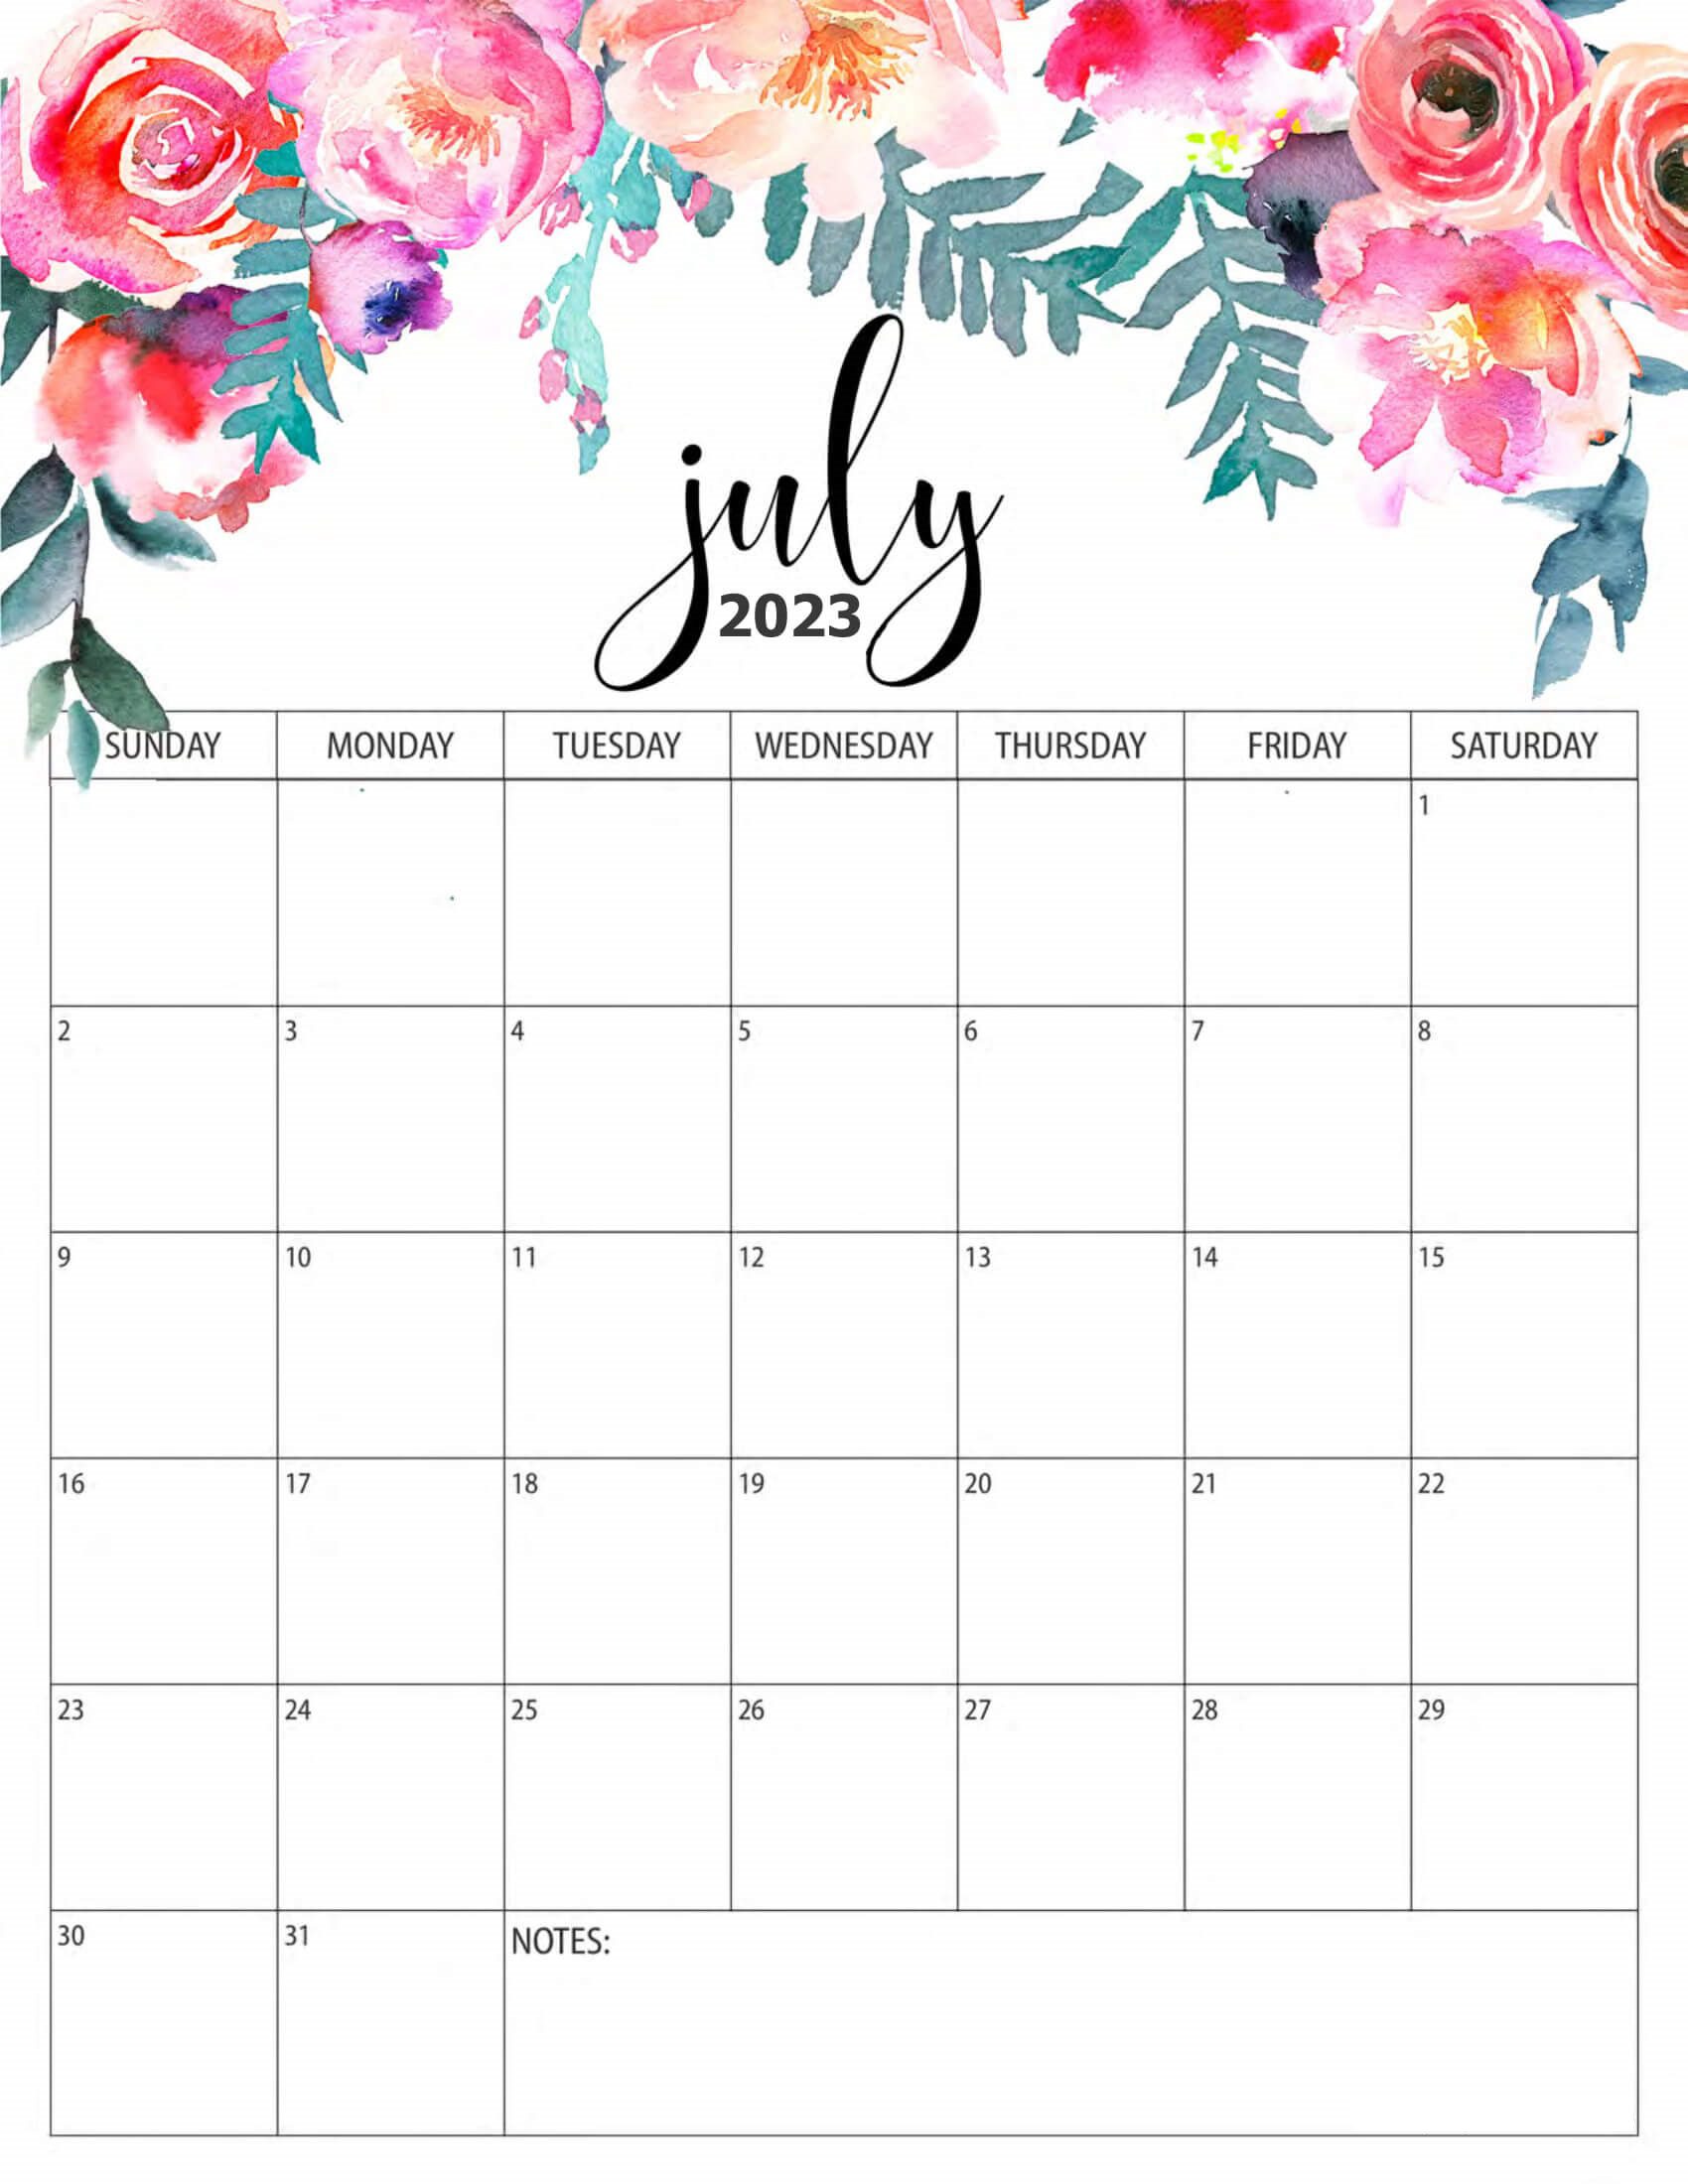 Red Roses- July 2023 Calendar with Notes